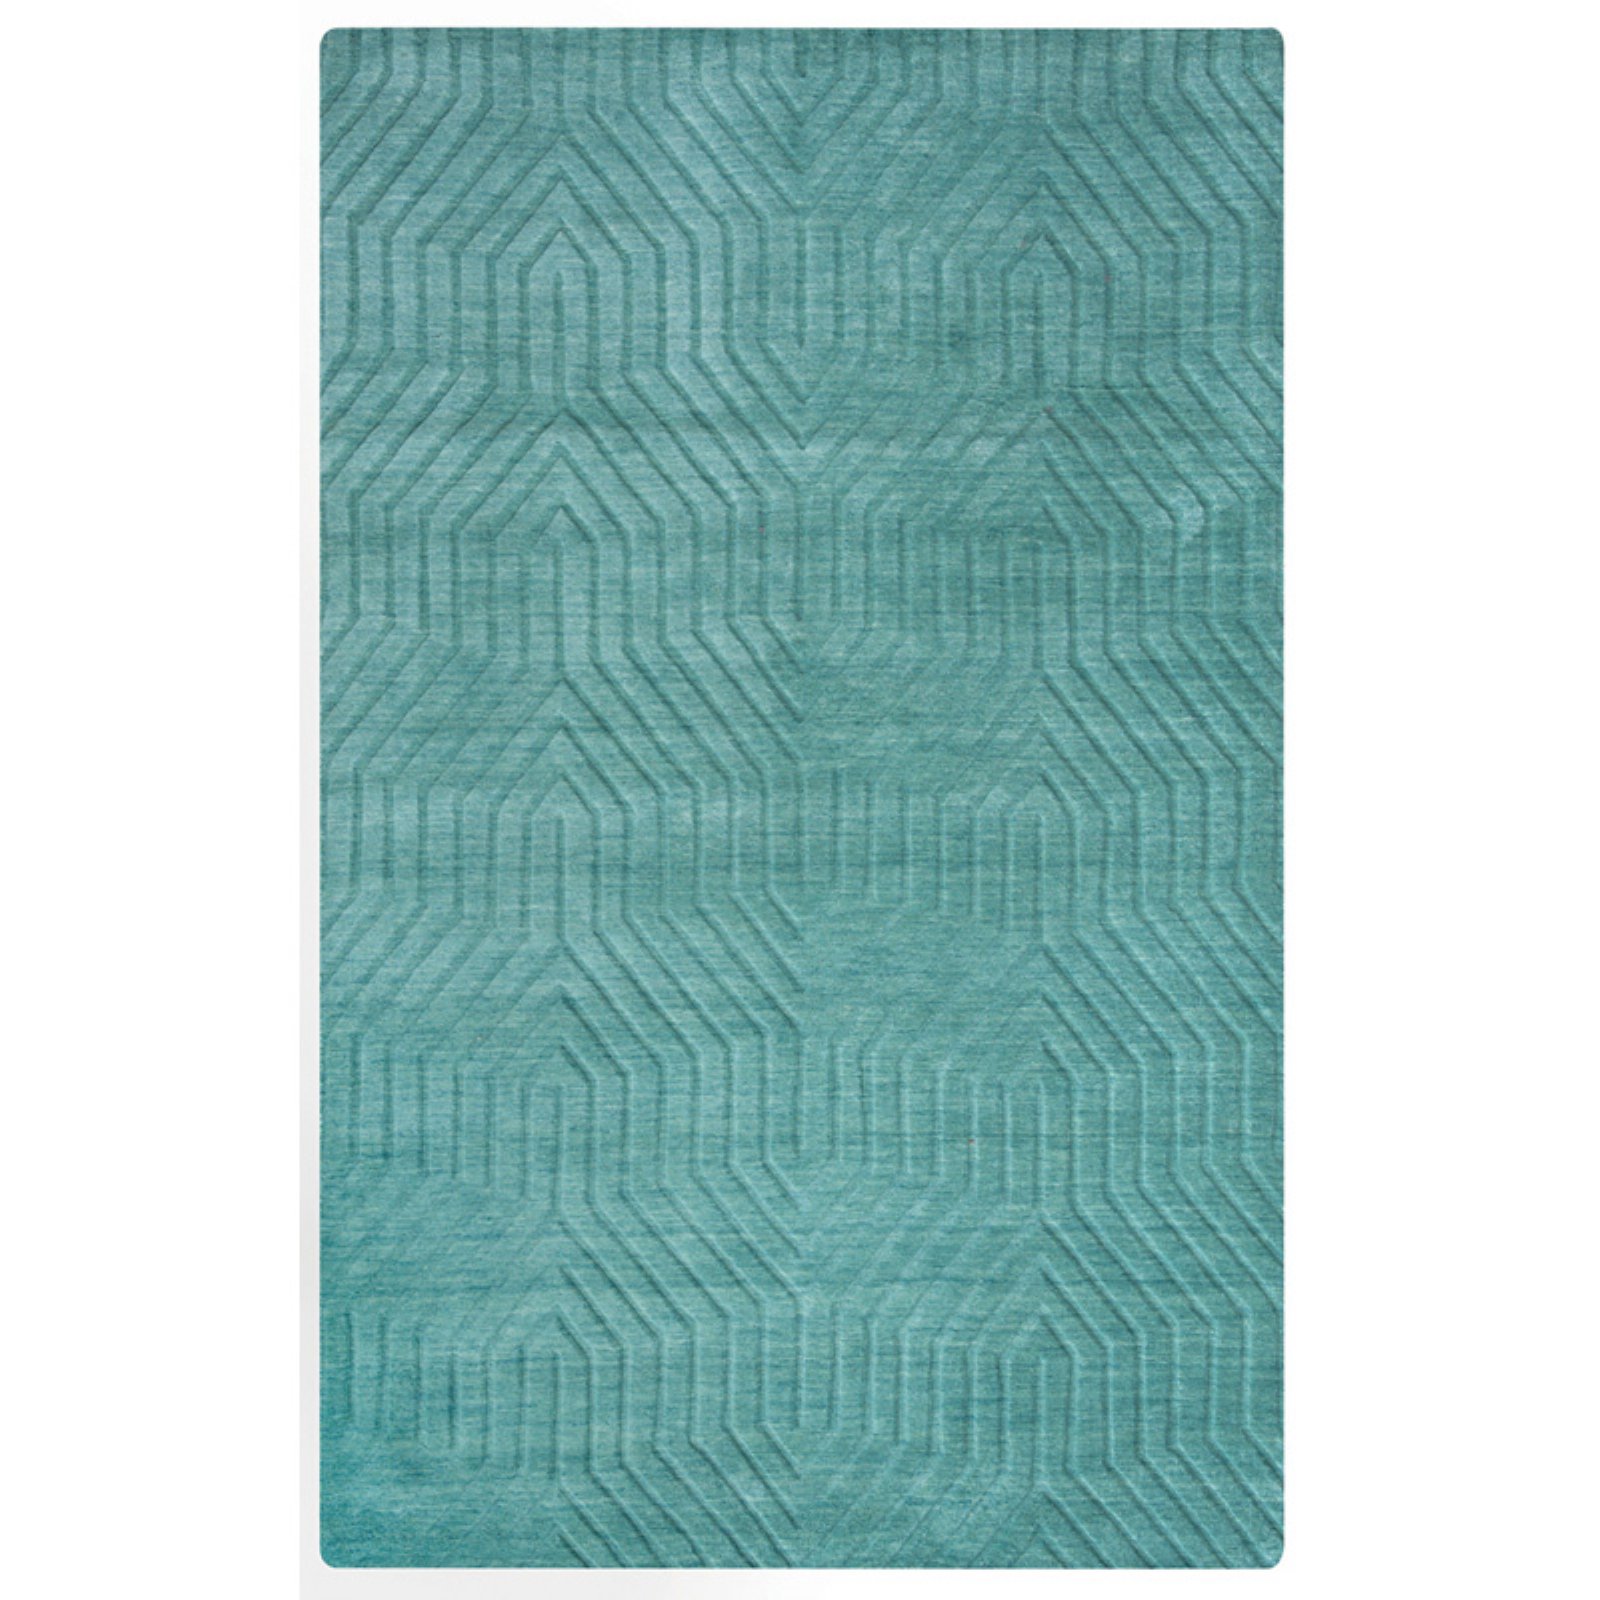 Technique 8' x 10' Solid Blue/Dark Teal Hand Loomed Area Rug - image 1 of 4